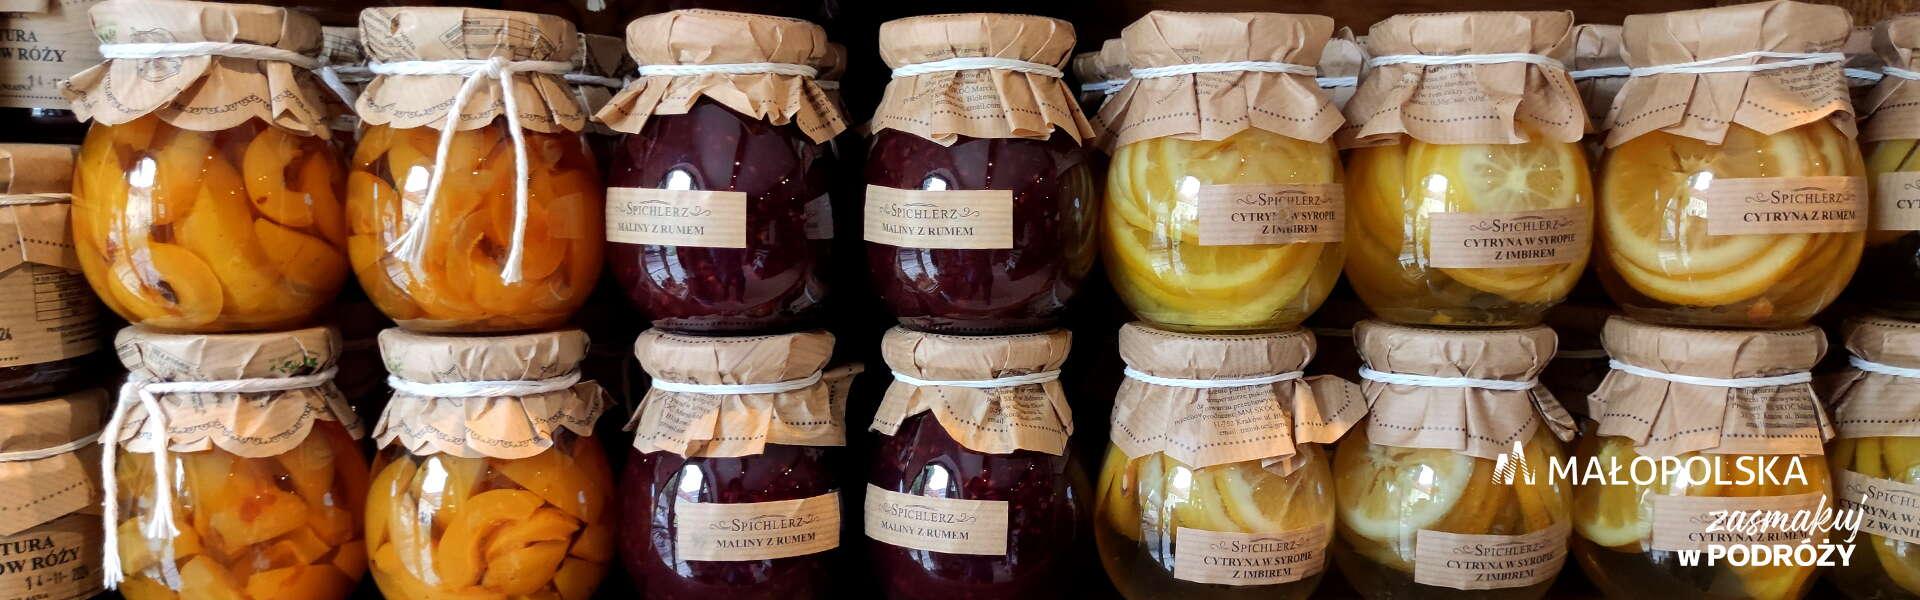 A shelf full of jars of peaches, raspberries and lemons in syrup, in the bottom right corner the logo of Malopolska (Lesser Poland) and the inscription ‘Enjoy your journey’